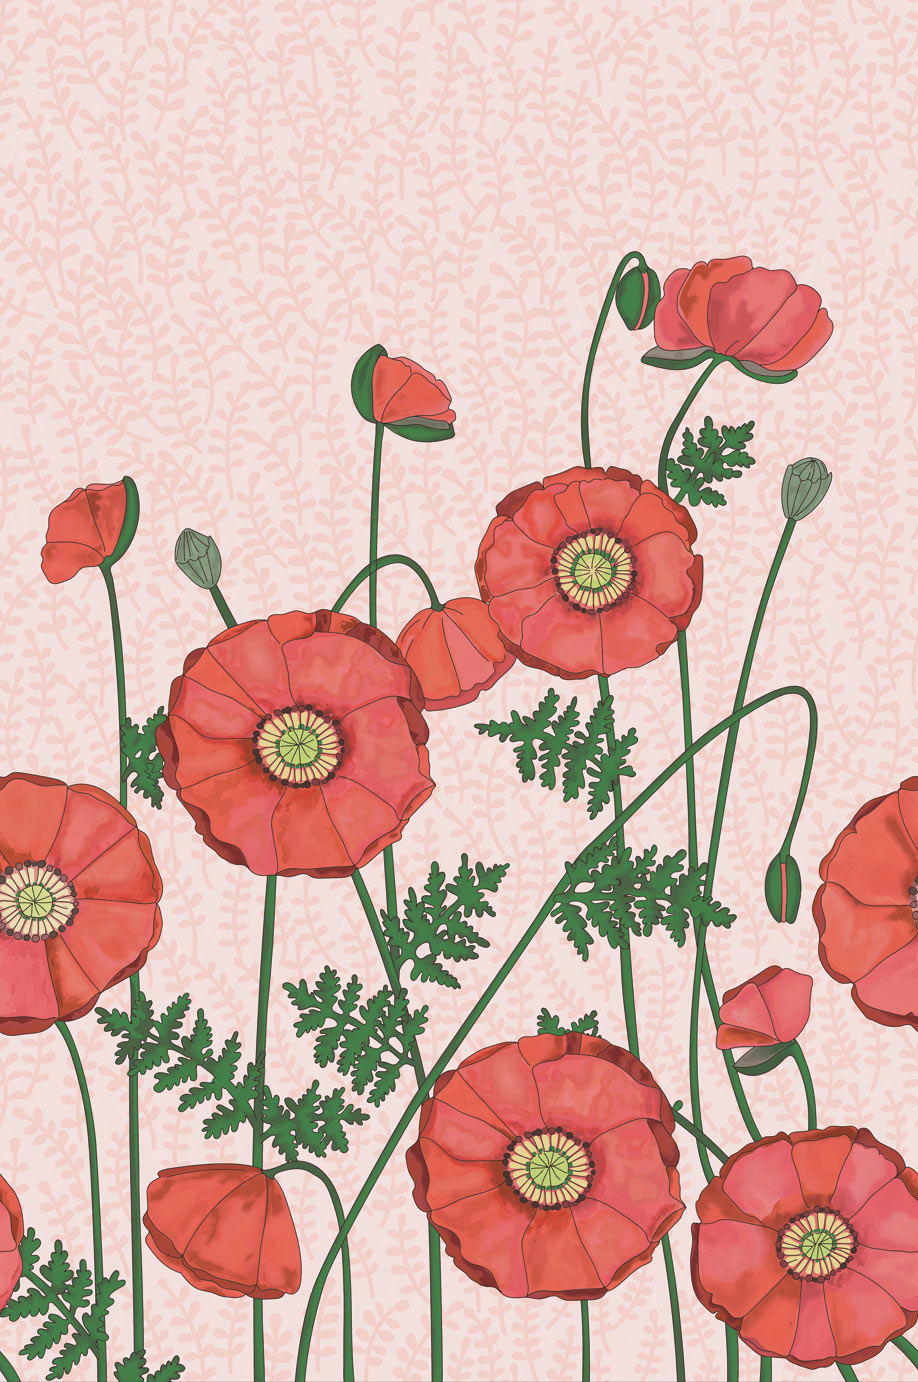 Rice Giant Poppies mural